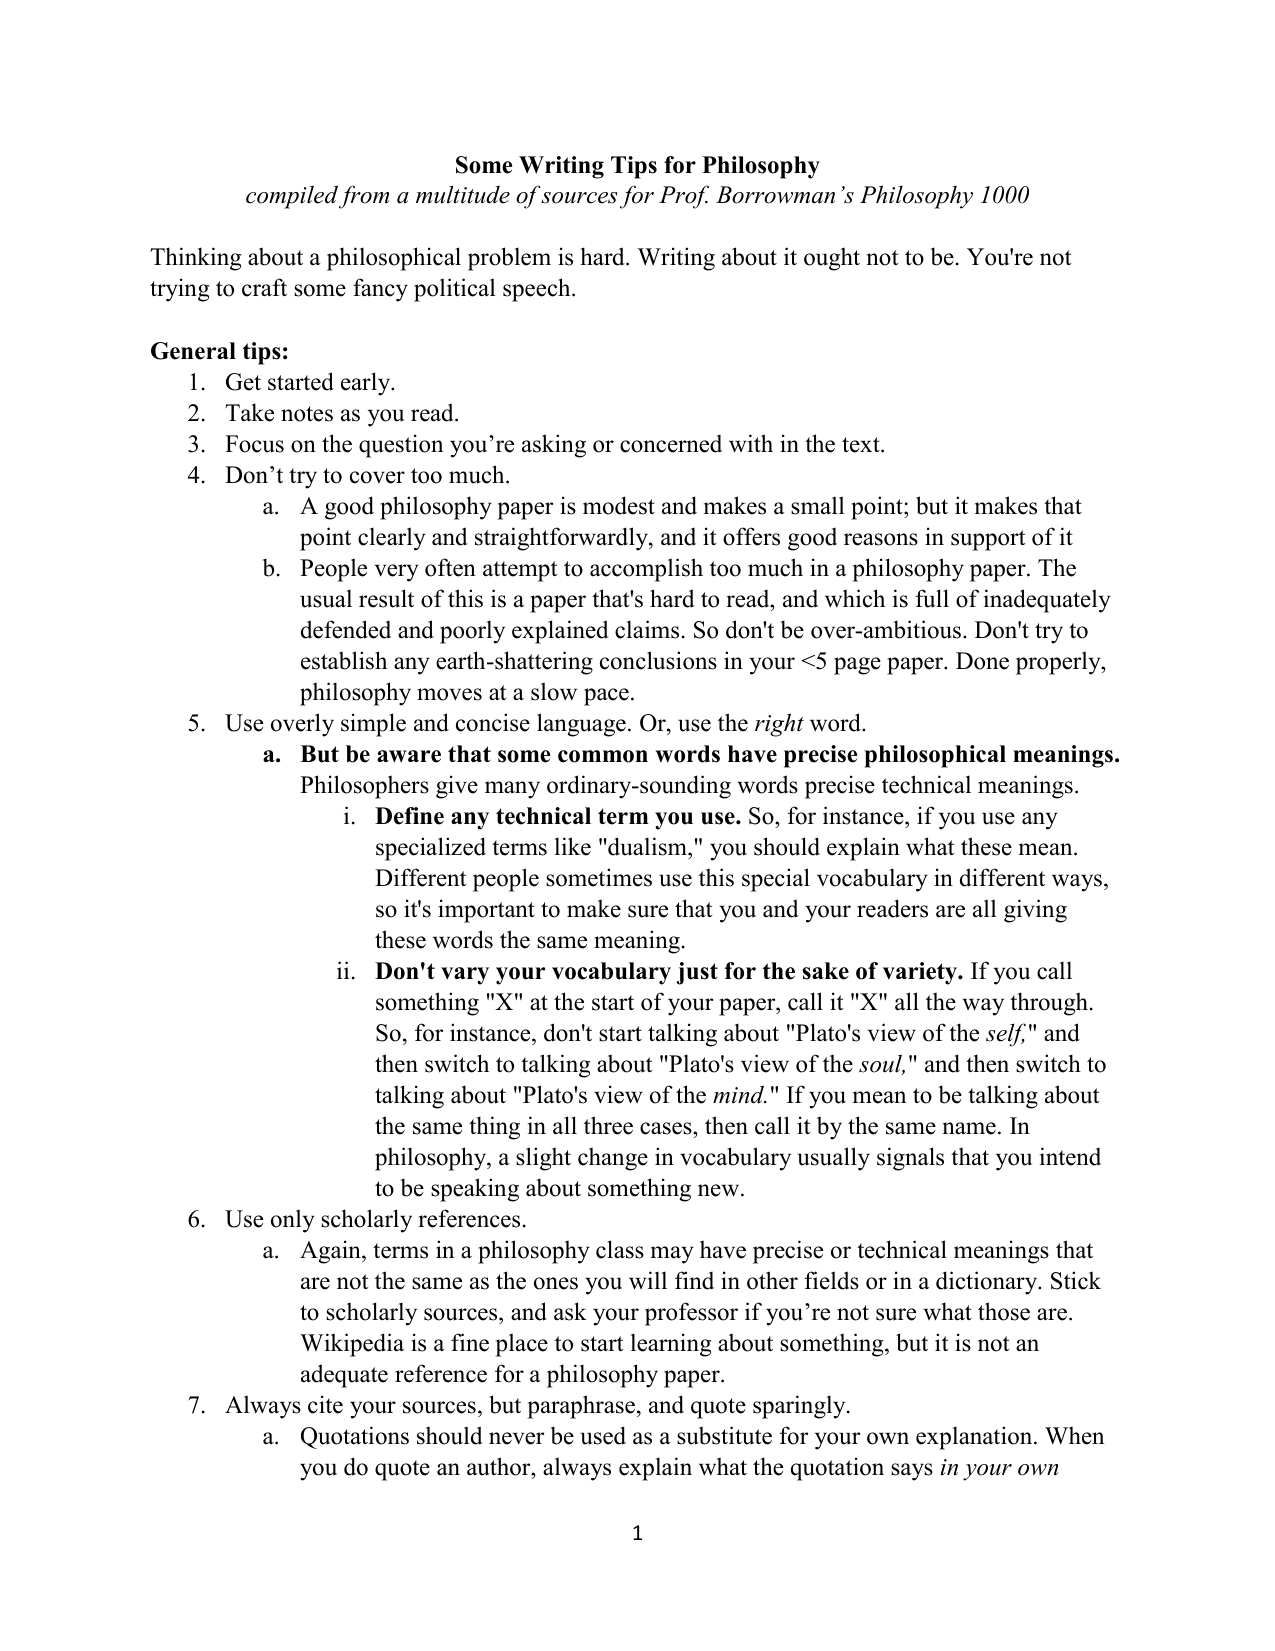 Research papers outline template